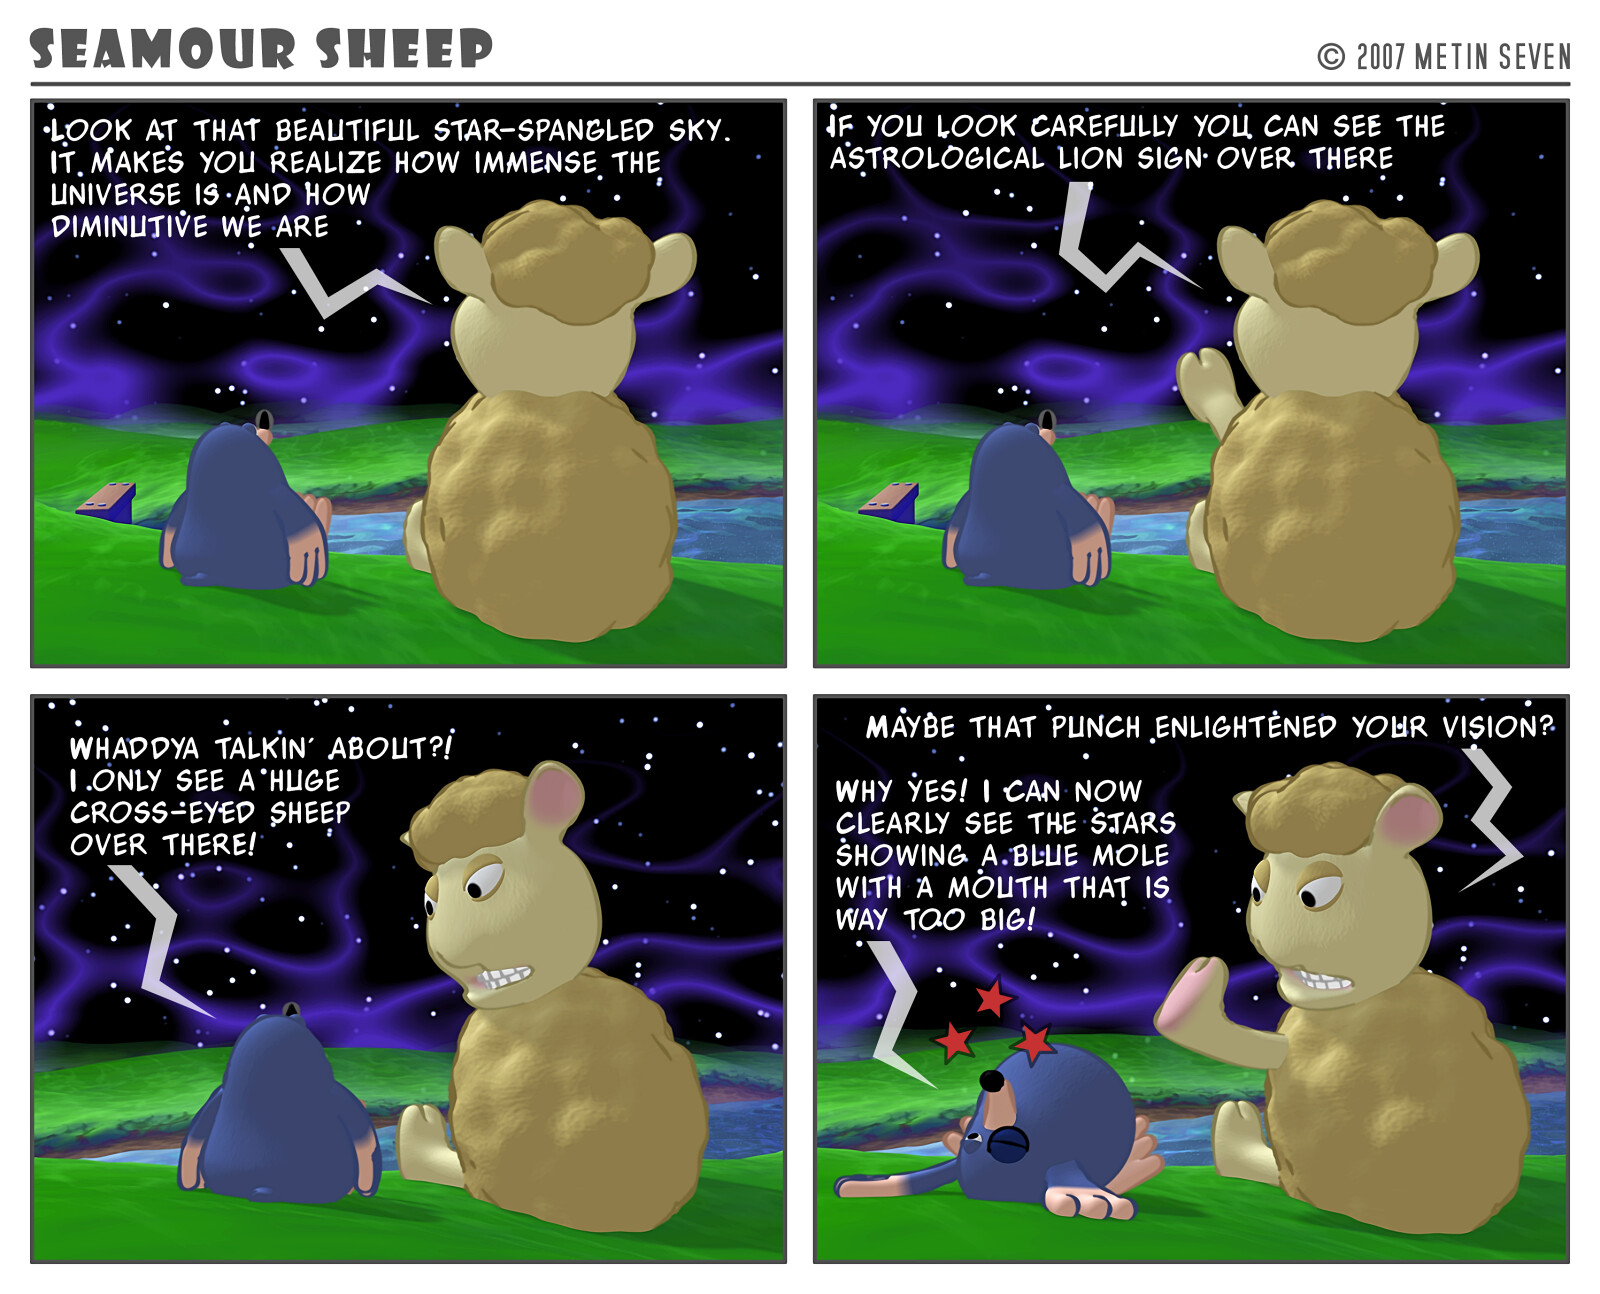 Seamour Sheep and Marty Mole comic strip episode: Stars